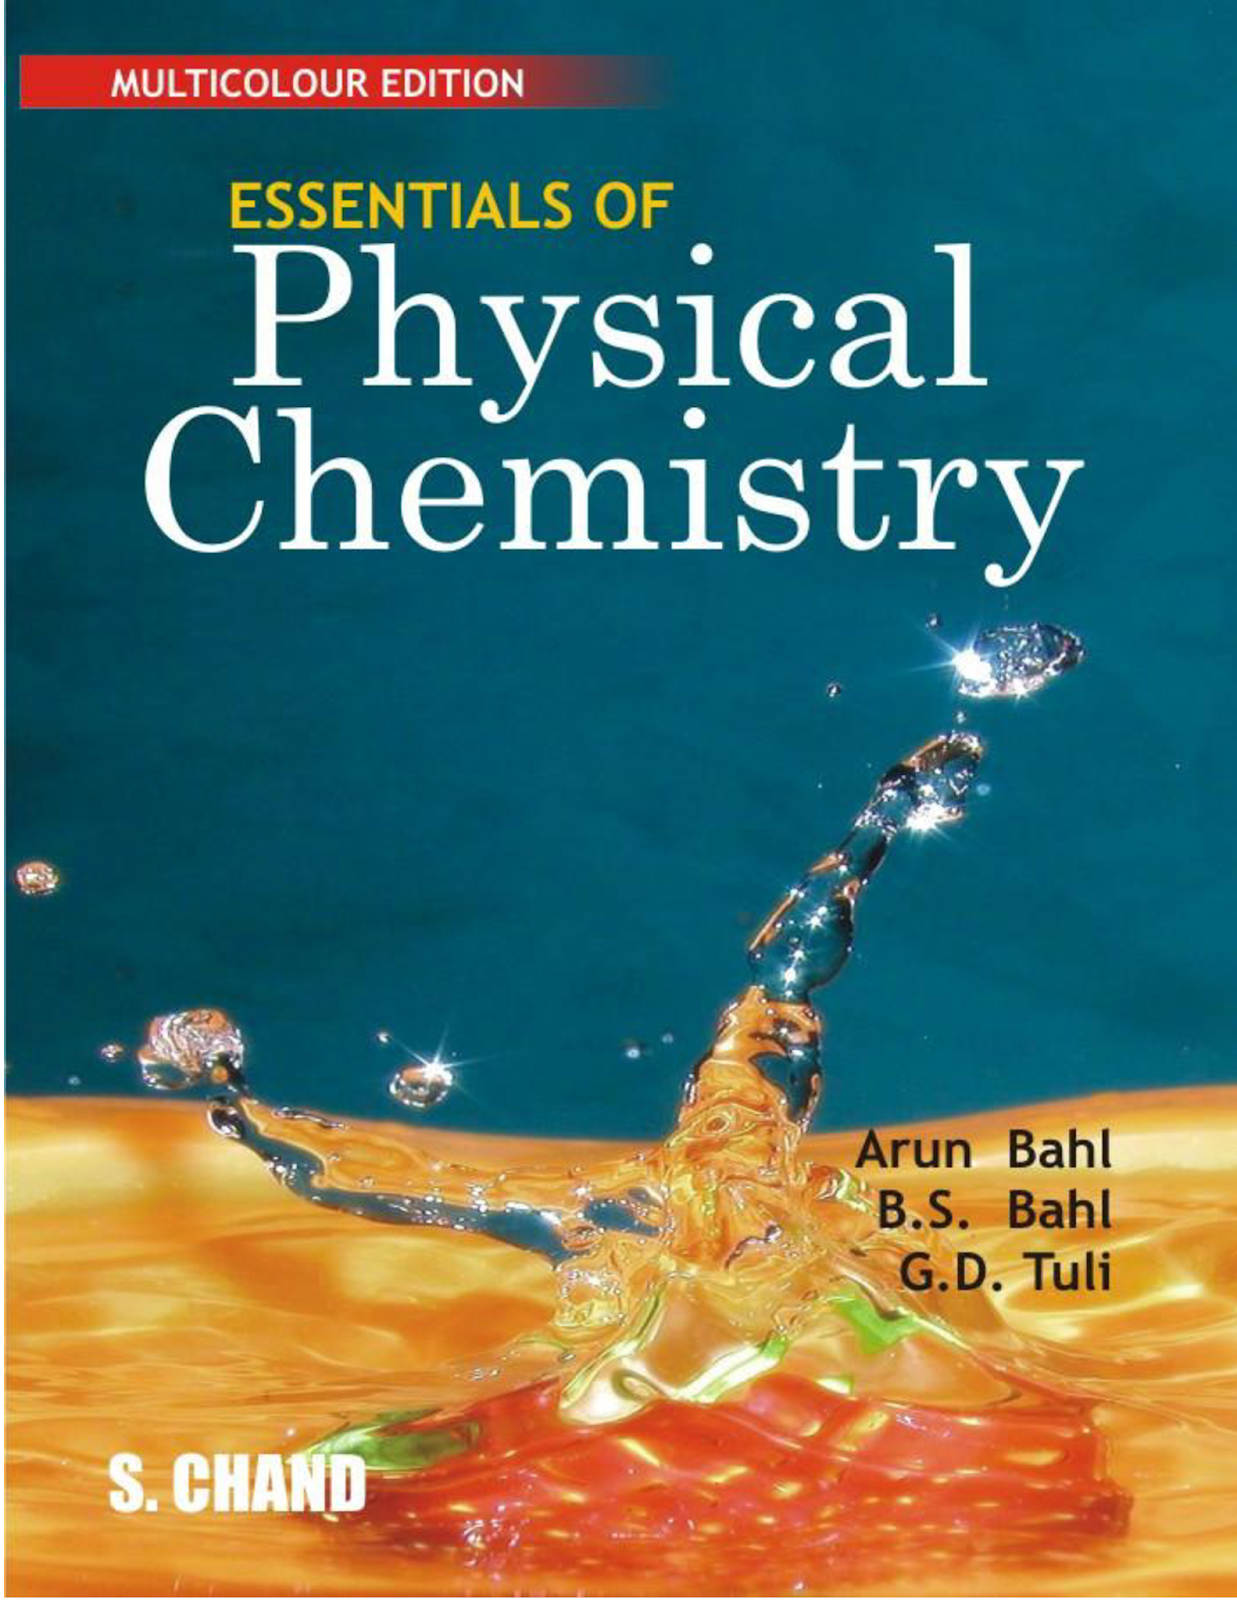 Physical chemistry. Book of Chemistry and physics. Physical Chemistry for Dummies. Арун химия.